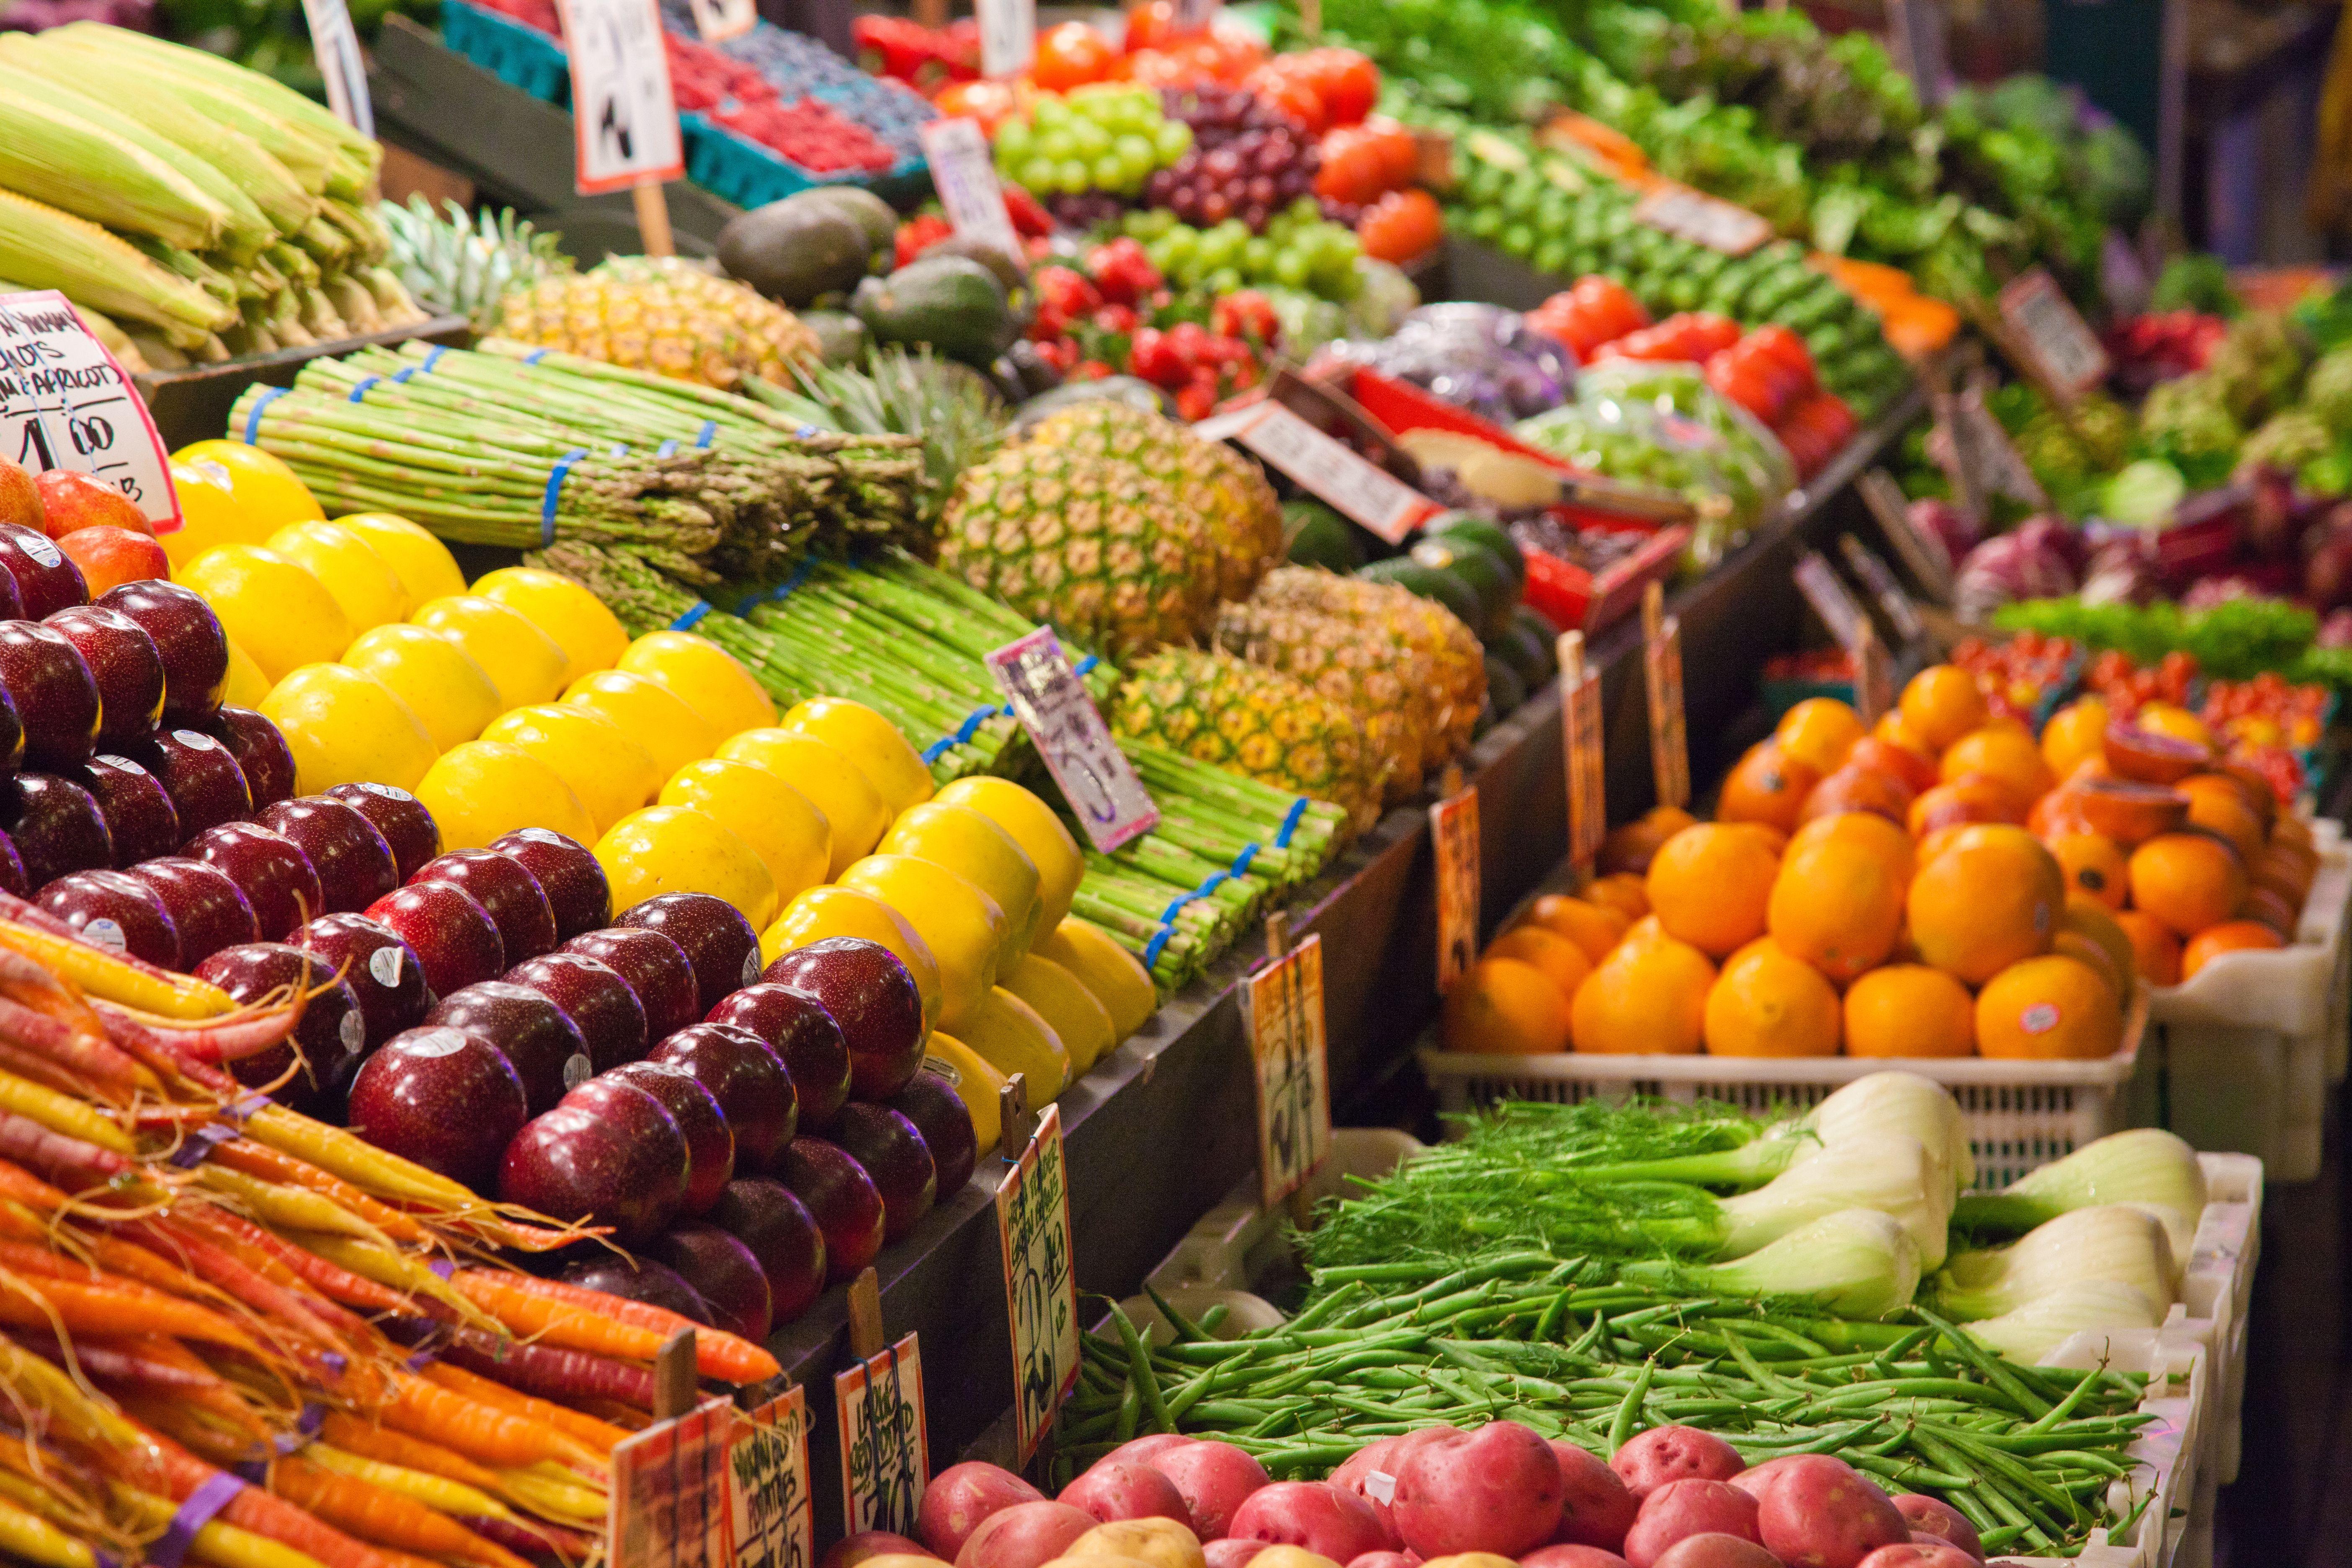 Fruits and Vegetables: 90% of Americans Don't Eat Enough